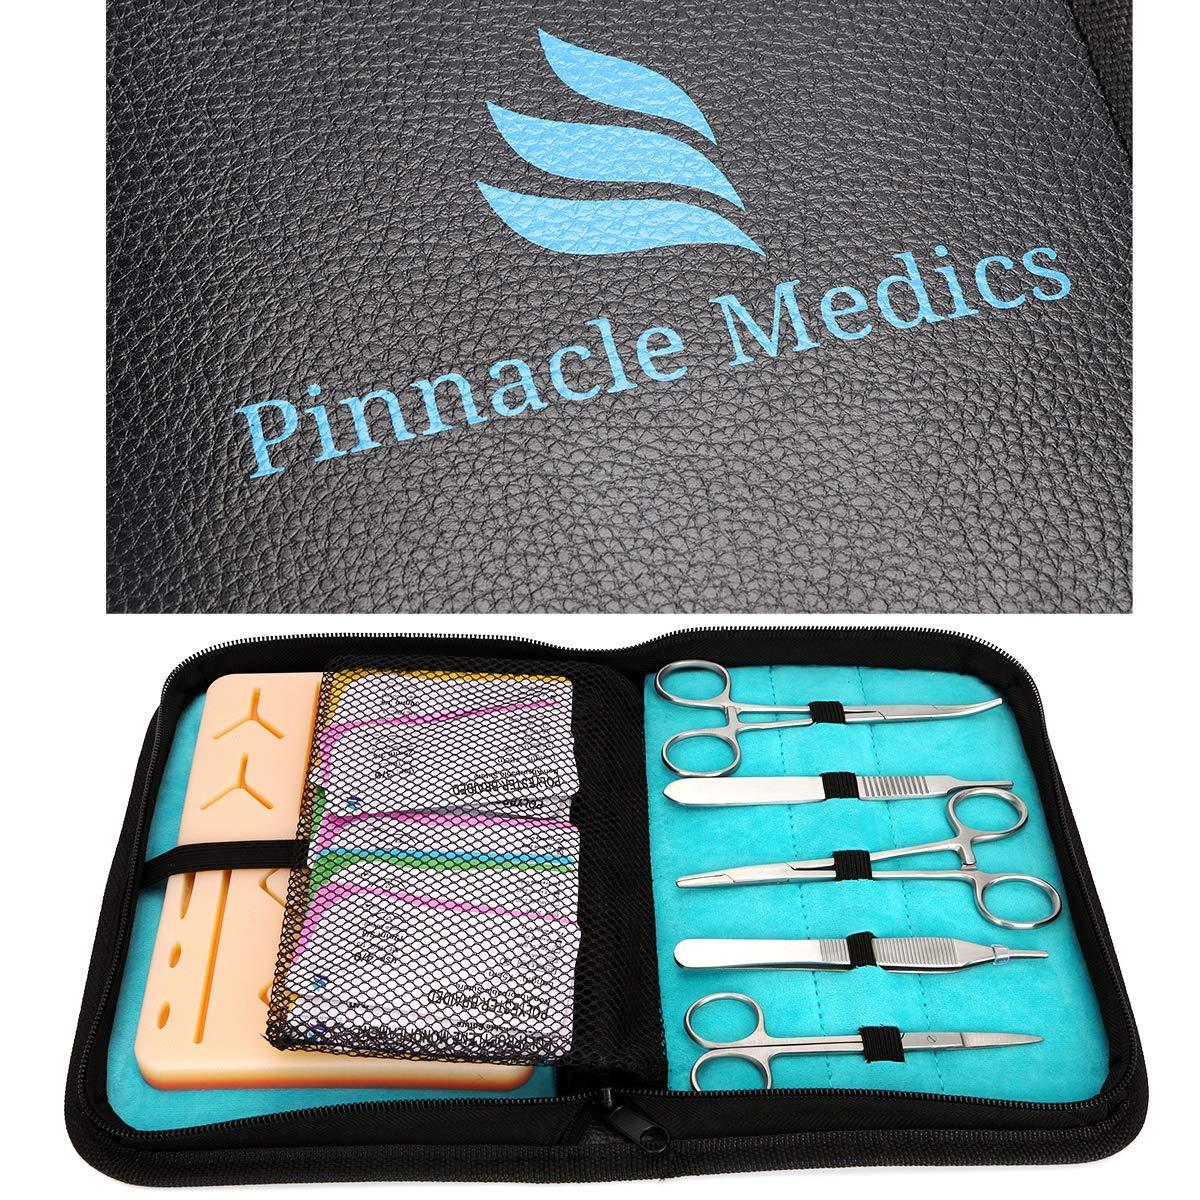 Suture Kit | Suture Practice Kit for Medical Students | 24 Mixed Sutures  Thread with Needle and Suture Tool kit | for Medical, Nursing, and Vet